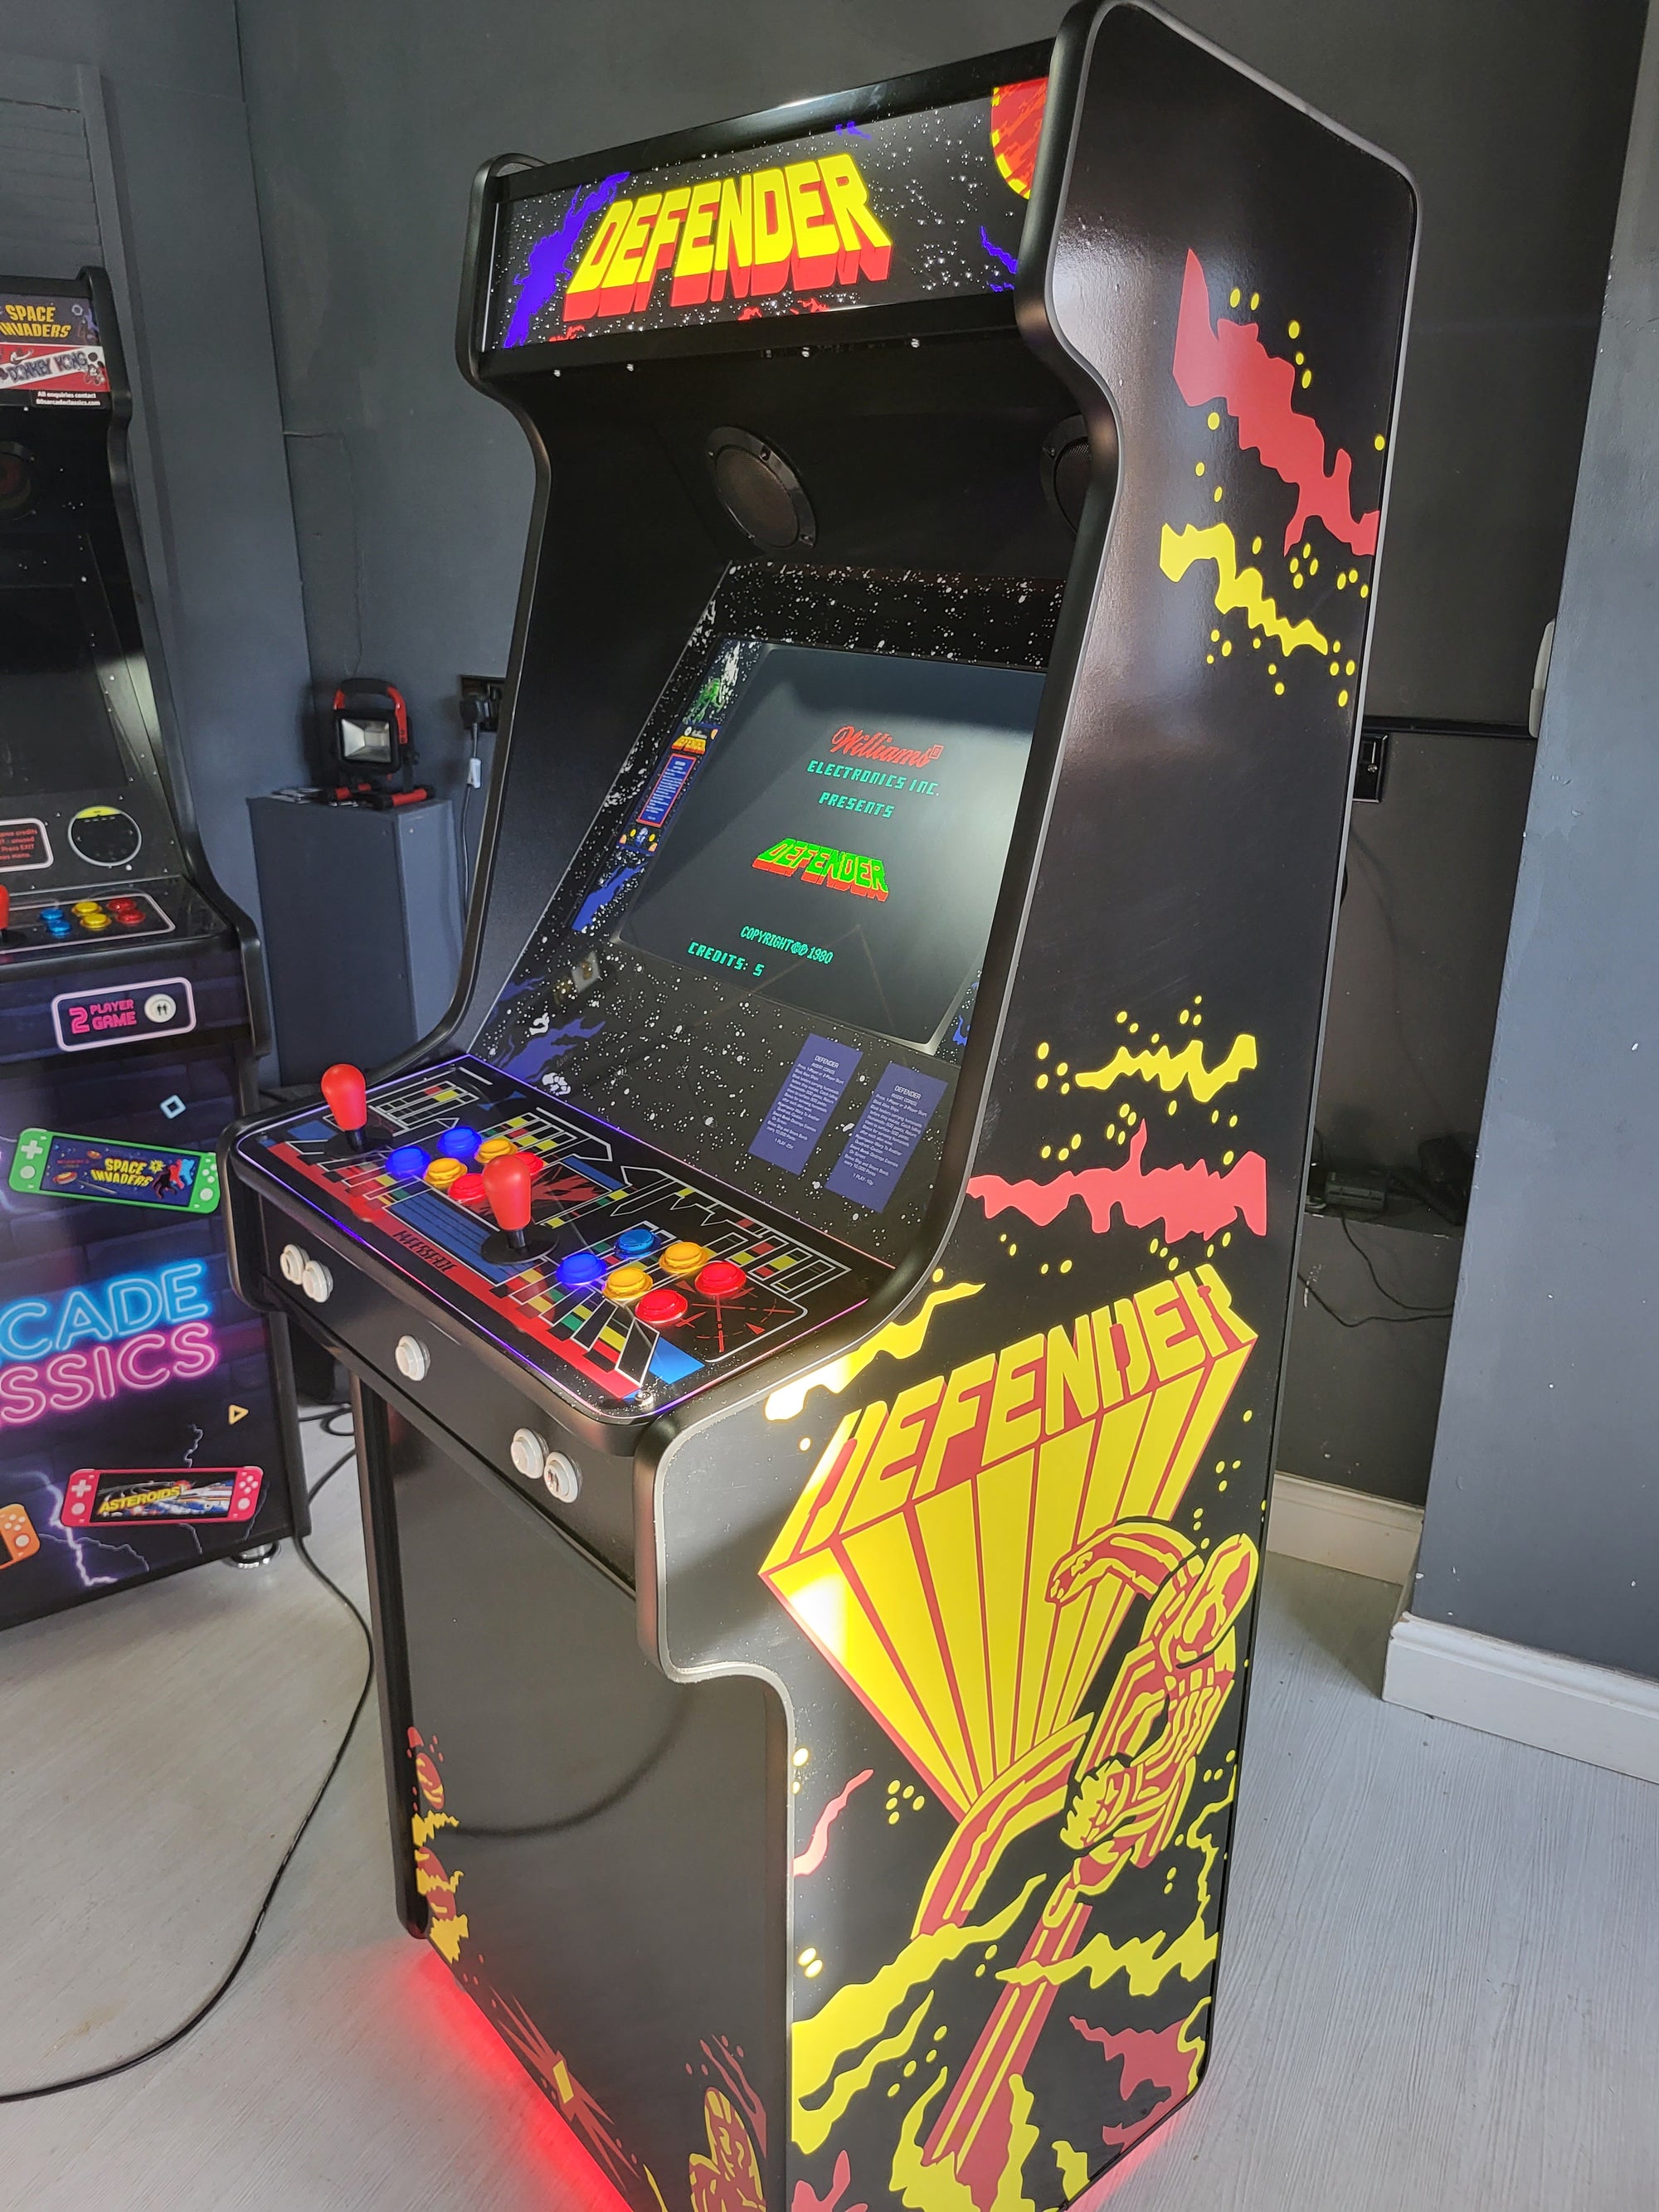 Which Arcade Machine for your home?